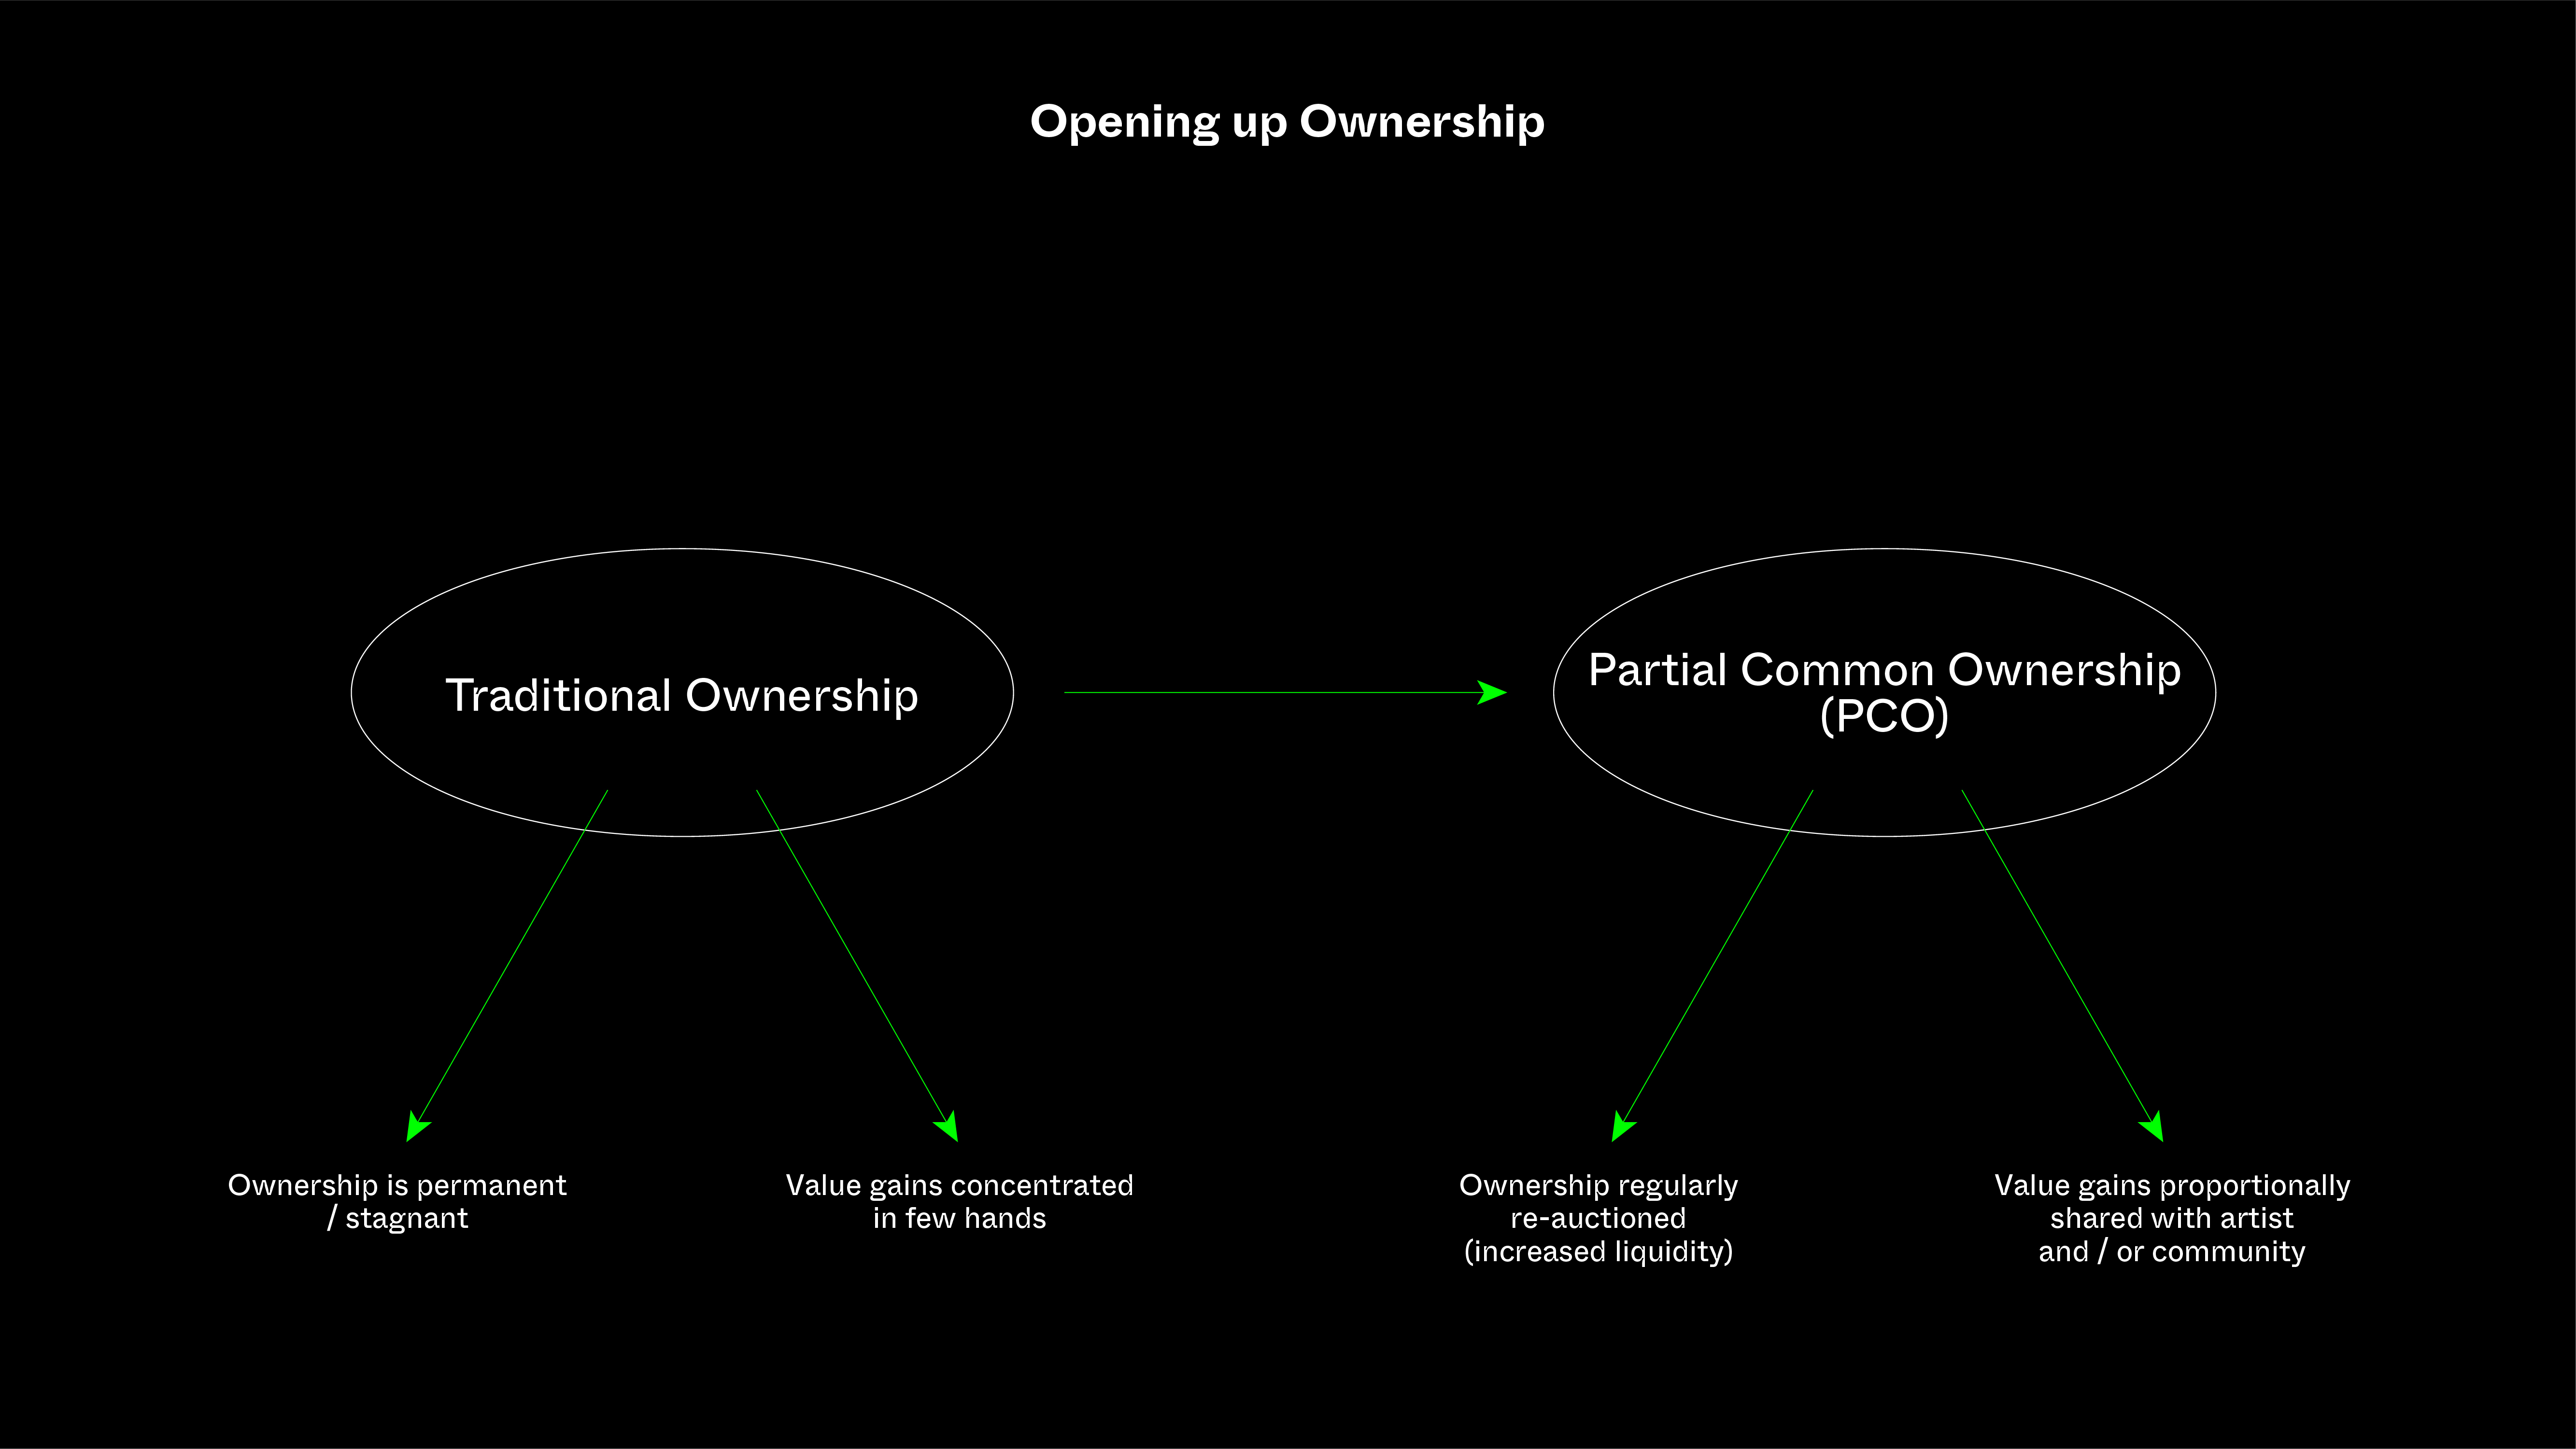 Opening up ownership